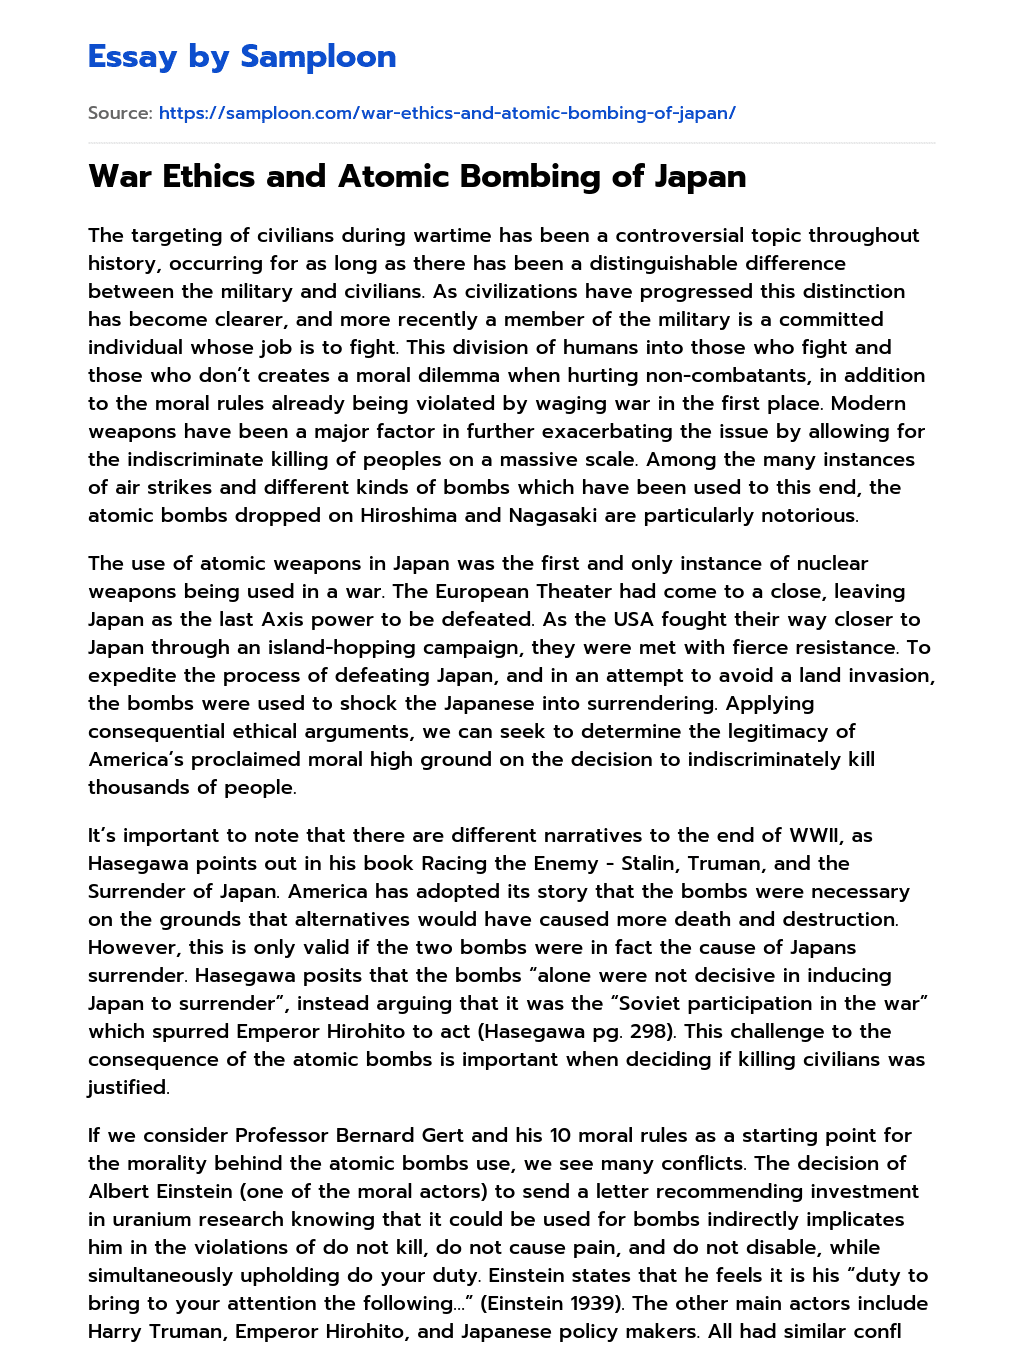 War Ethics and Atomic Bombing of Japan essay